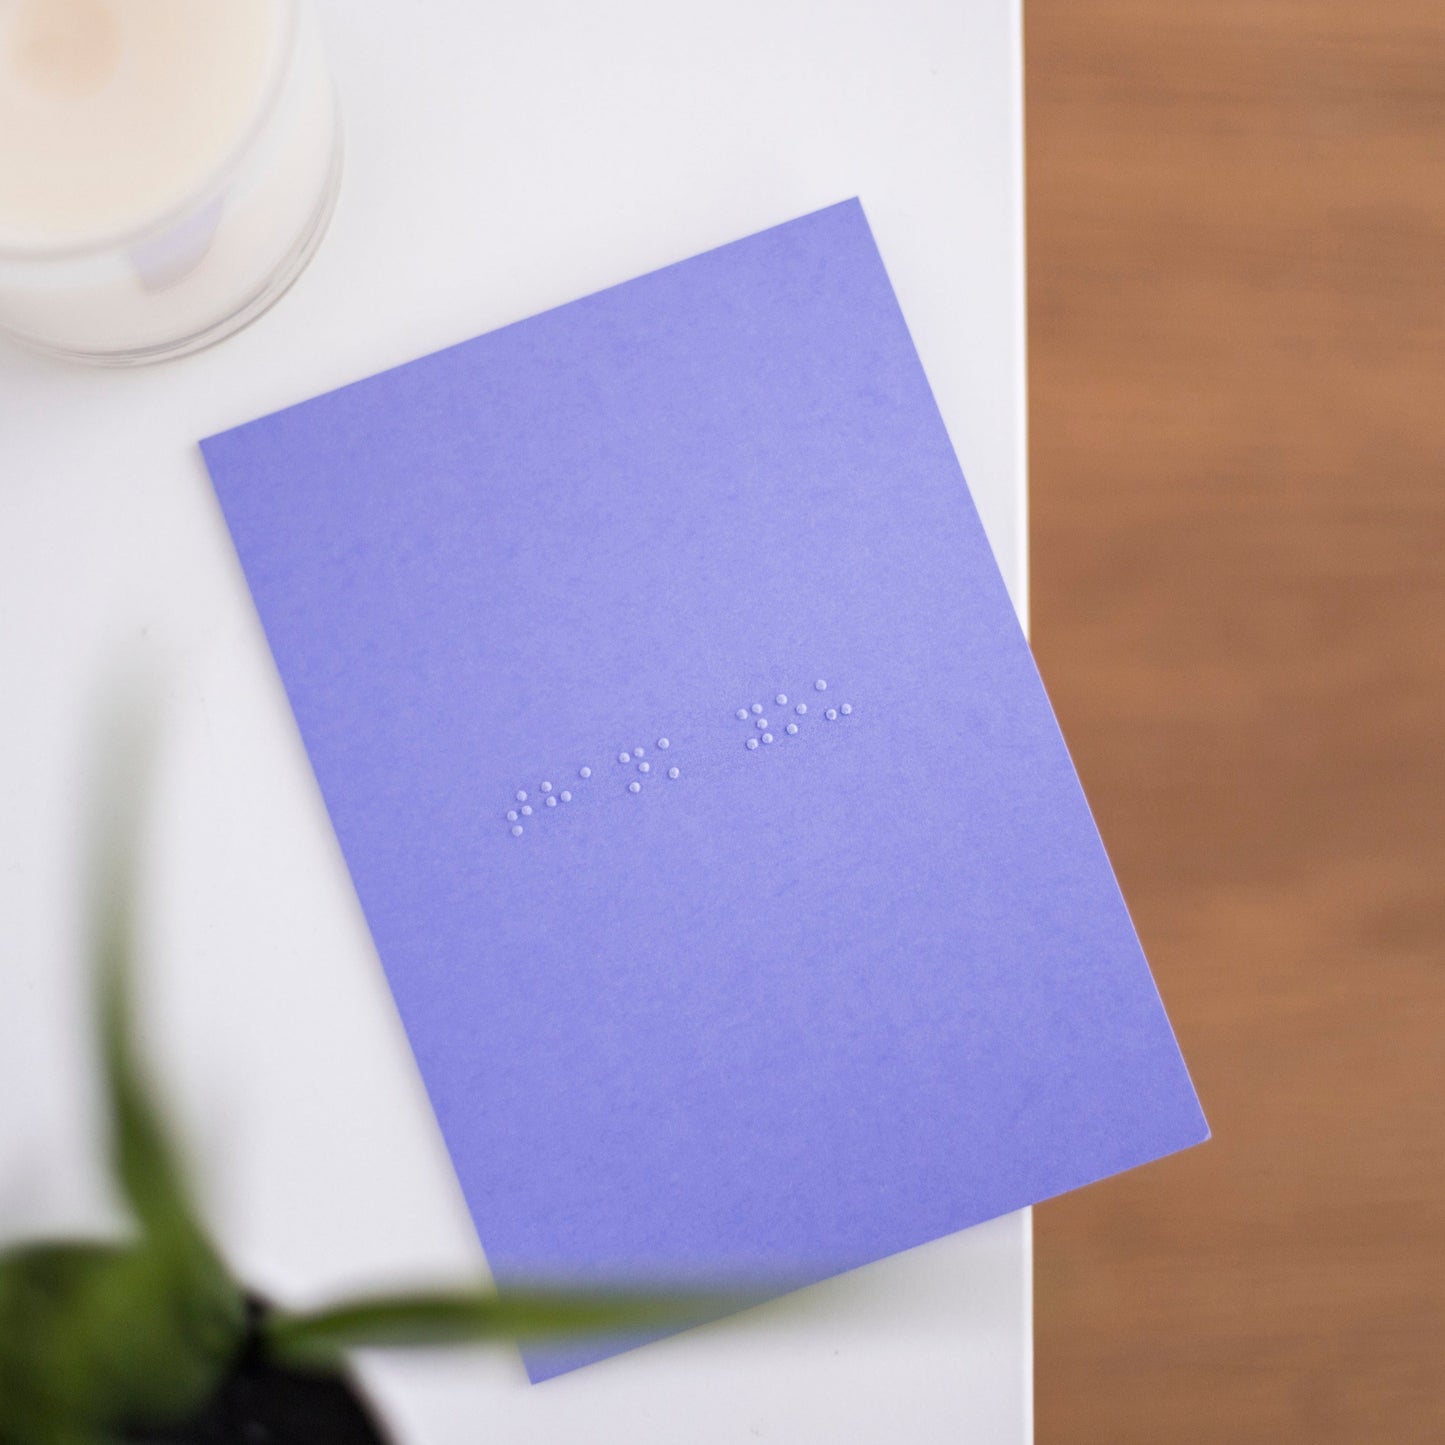 A vibrant purple card lay flat on a table with thank you written in lower case grade one braille. There is a candle in the top left and a blurry plant in the bottom left.